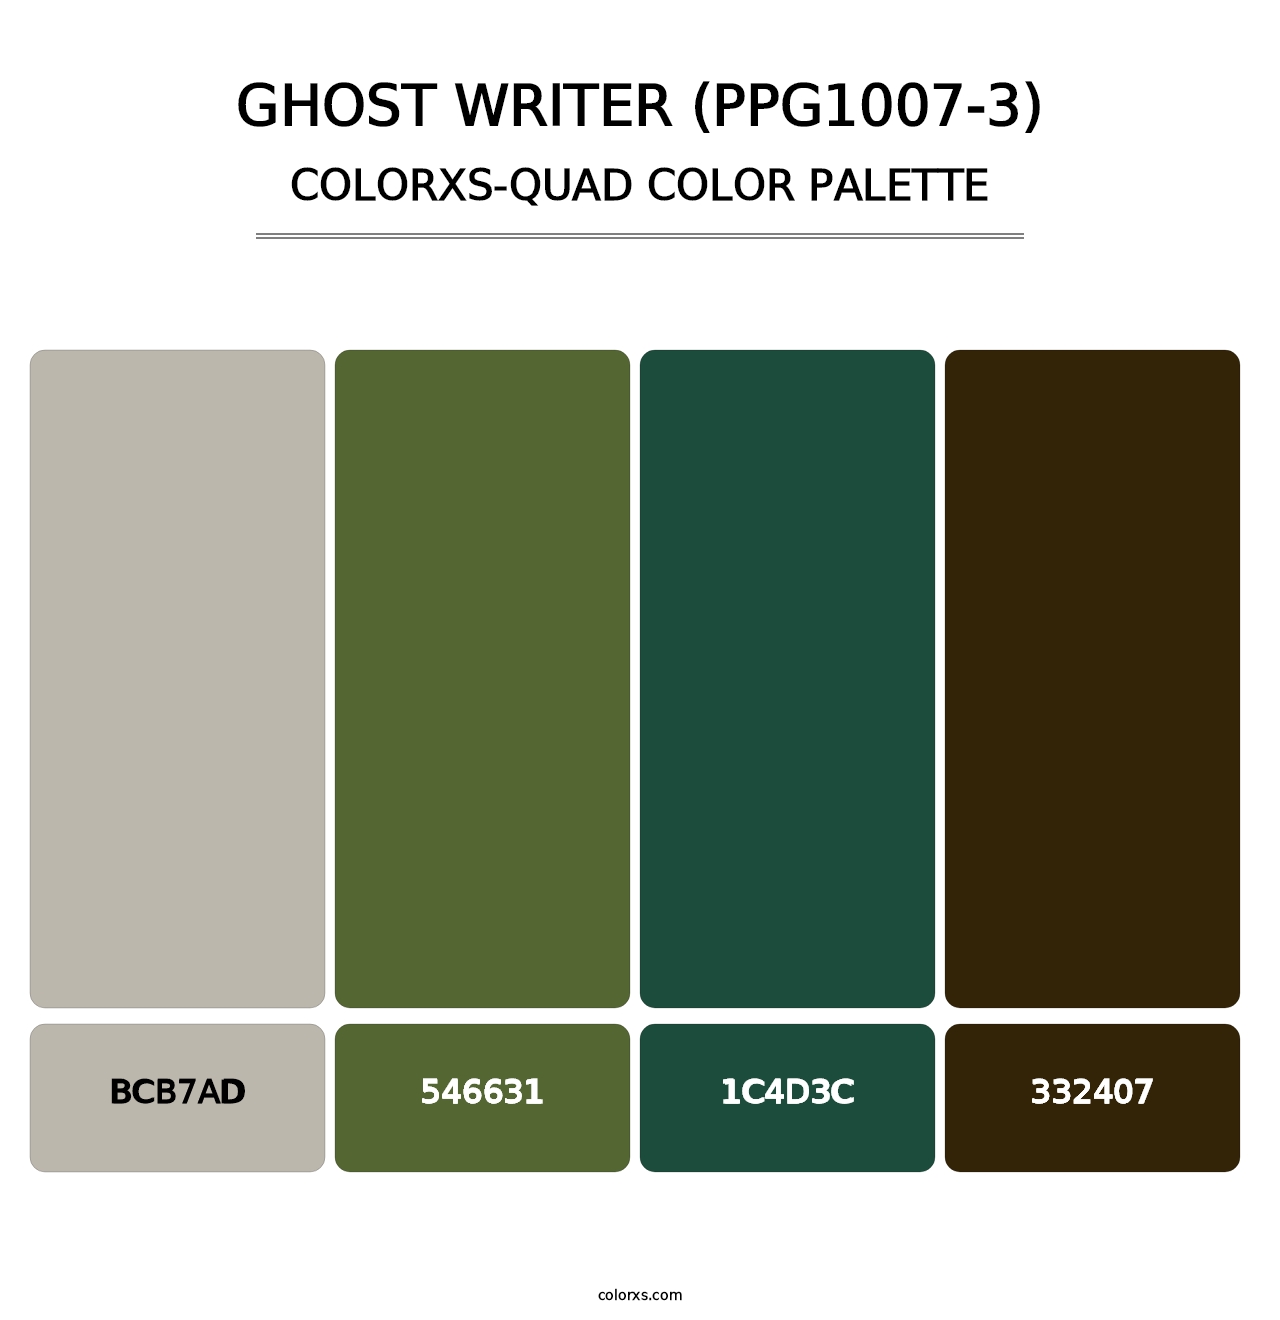 Ghost Writer (PPG1007-3) - Colorxs Quad Palette